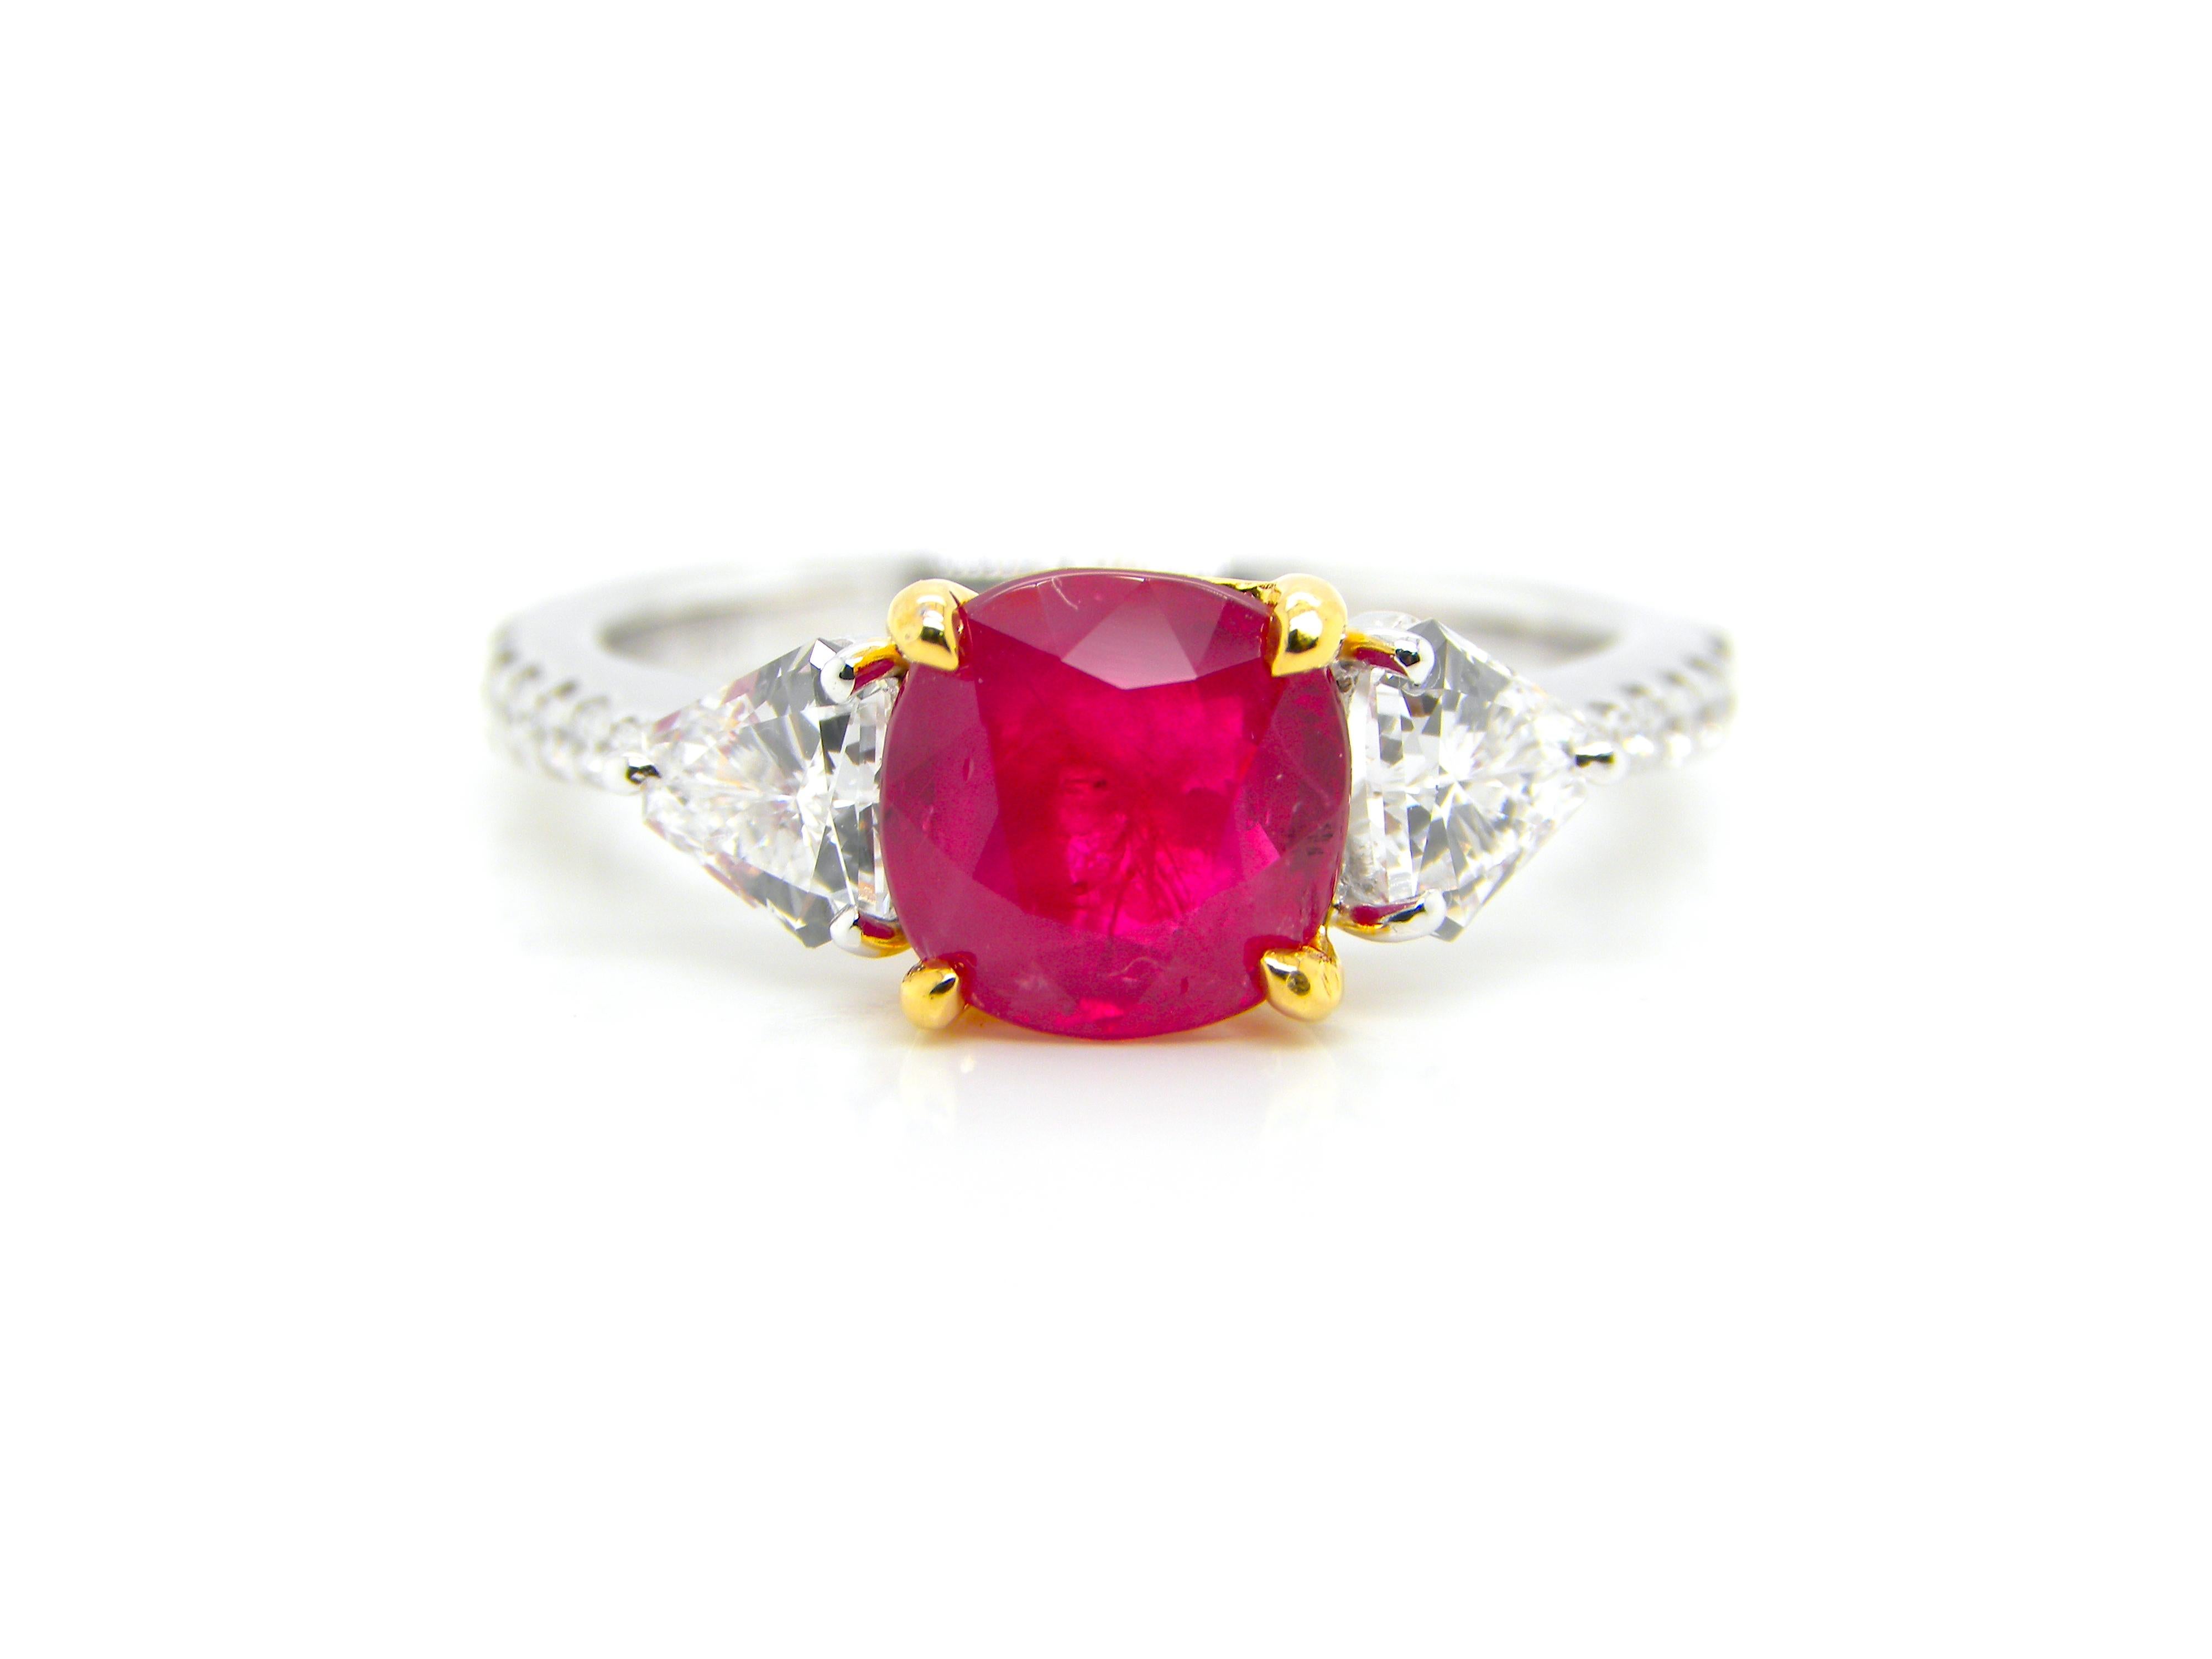 1.93 Carat GIA Certified Burma No Heat Pigeon's Blood Red Ruby and Diamond Ring:

A beautiful three-stone ring, it features a gorgeous GIA certified unheated Burmese pigeon's blood red ruby weighing 1.93 carat flanked by super-white shield cut